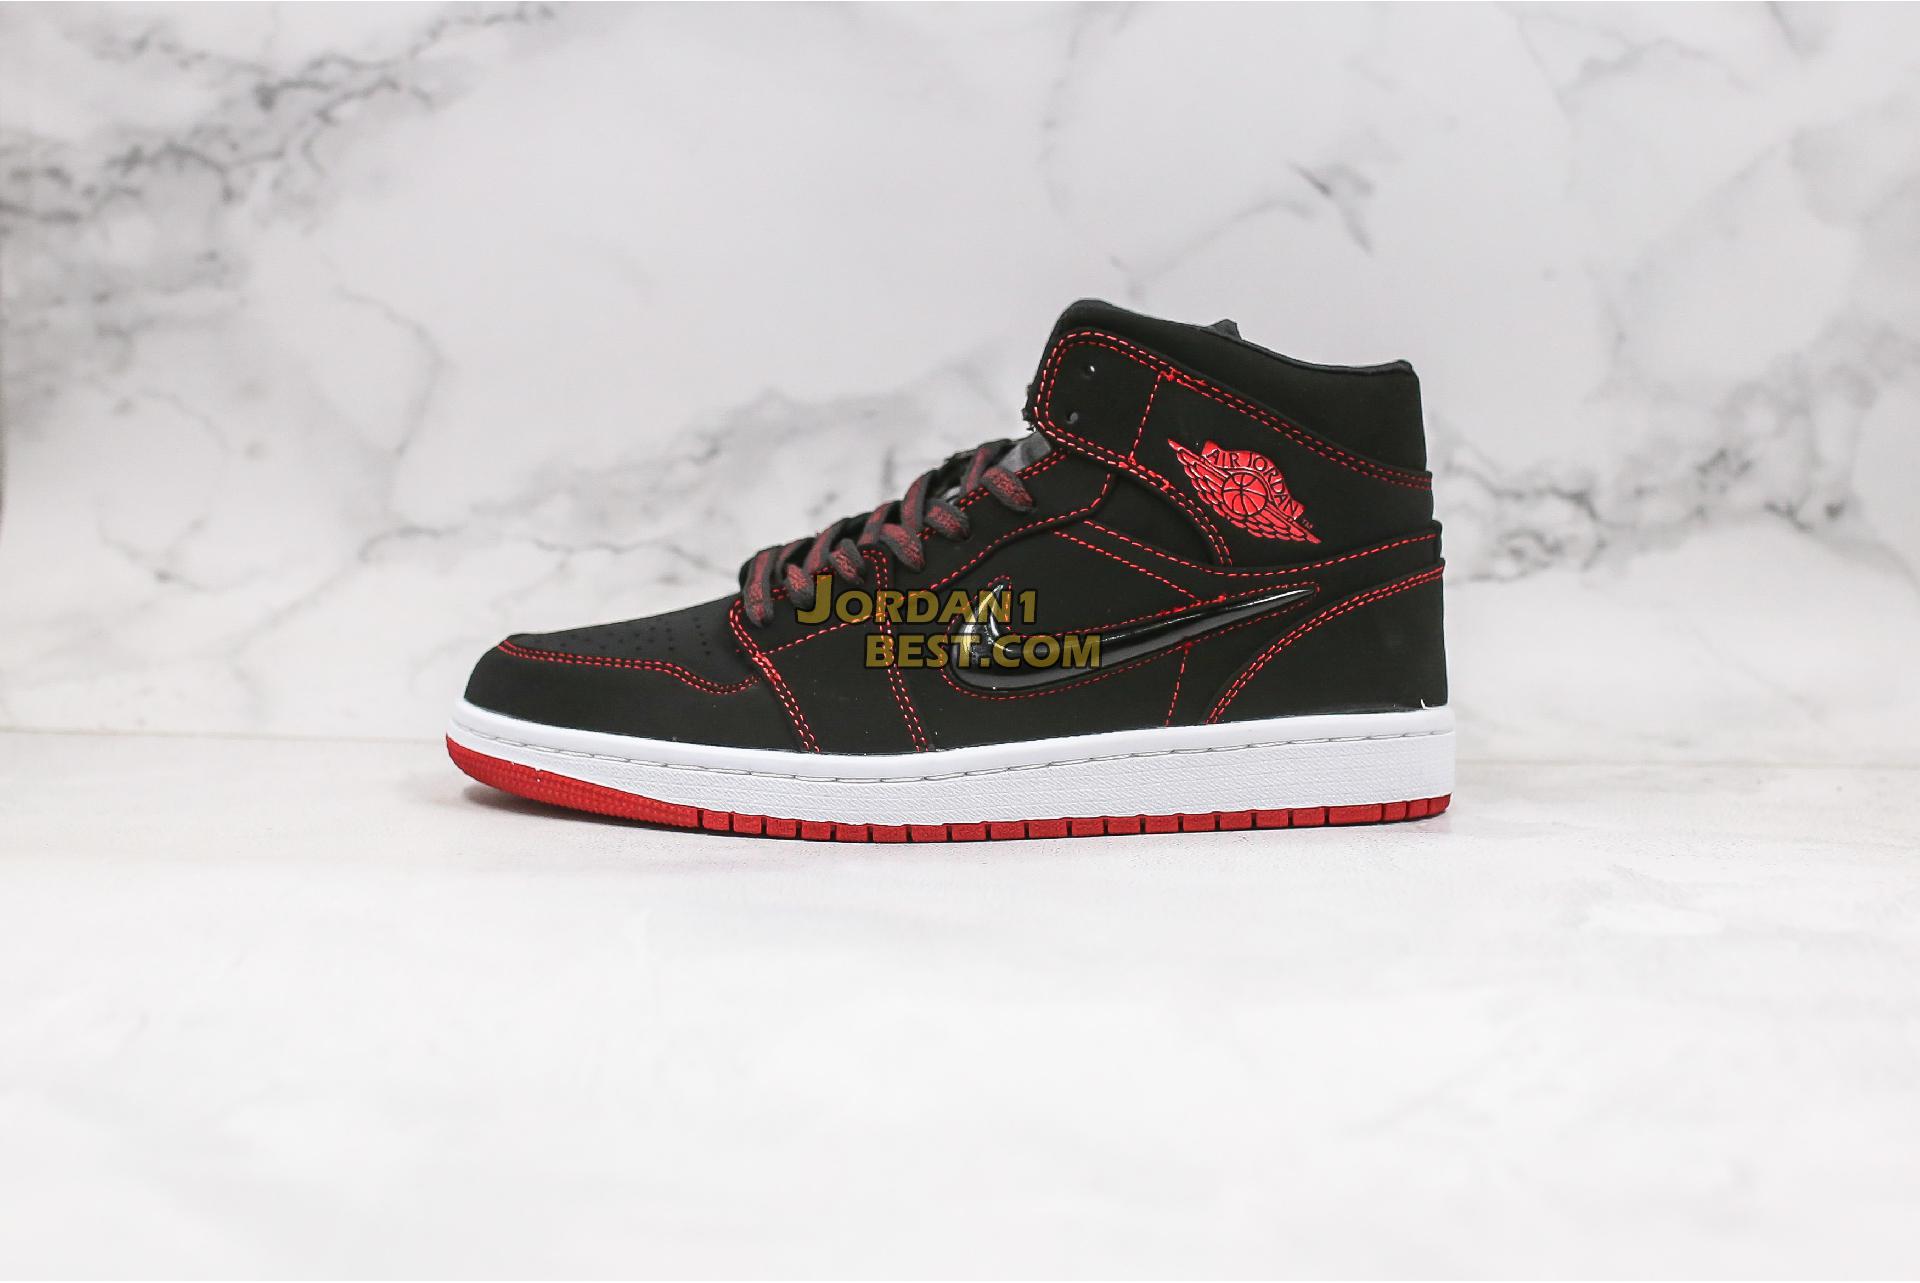 best replicas 2019 Air Jordan 1 Mid "Come Fly With Me" CK5665-062 Mens Womens black/gym red-white Shoes replicas On Wholesale Sale Online